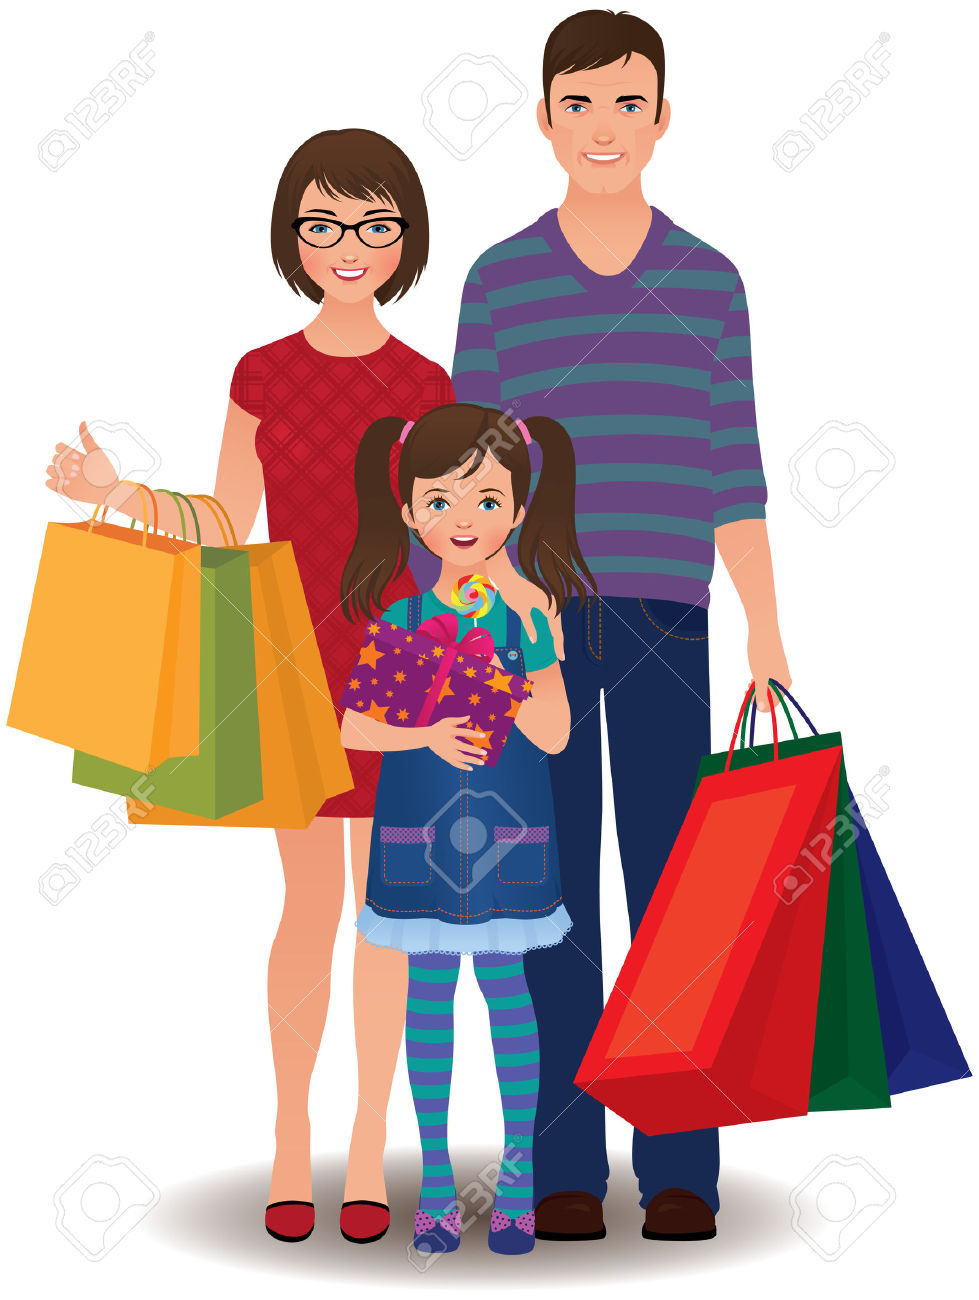 Family shopping clipart 10 » Clipart Station.